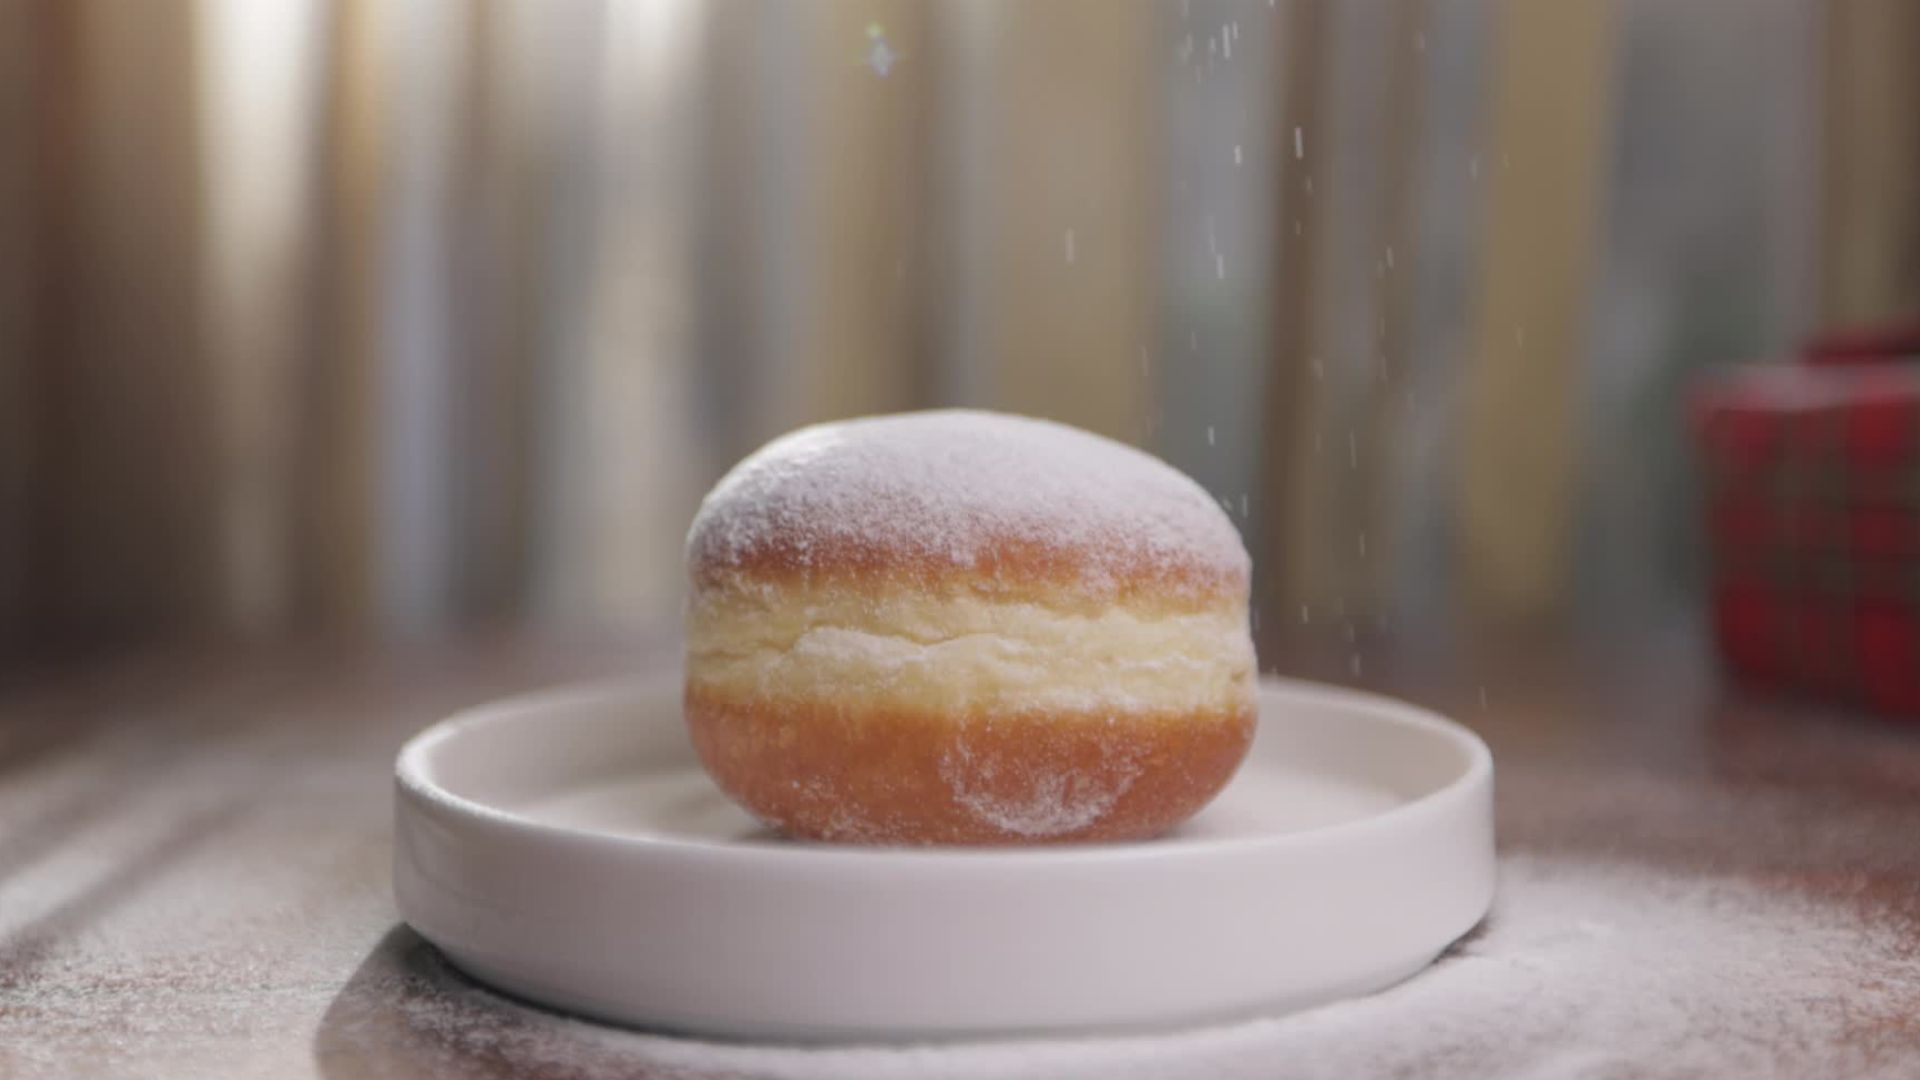 Fitting for Carnival: How many calories do Kreppel/Doughnuts actually have?